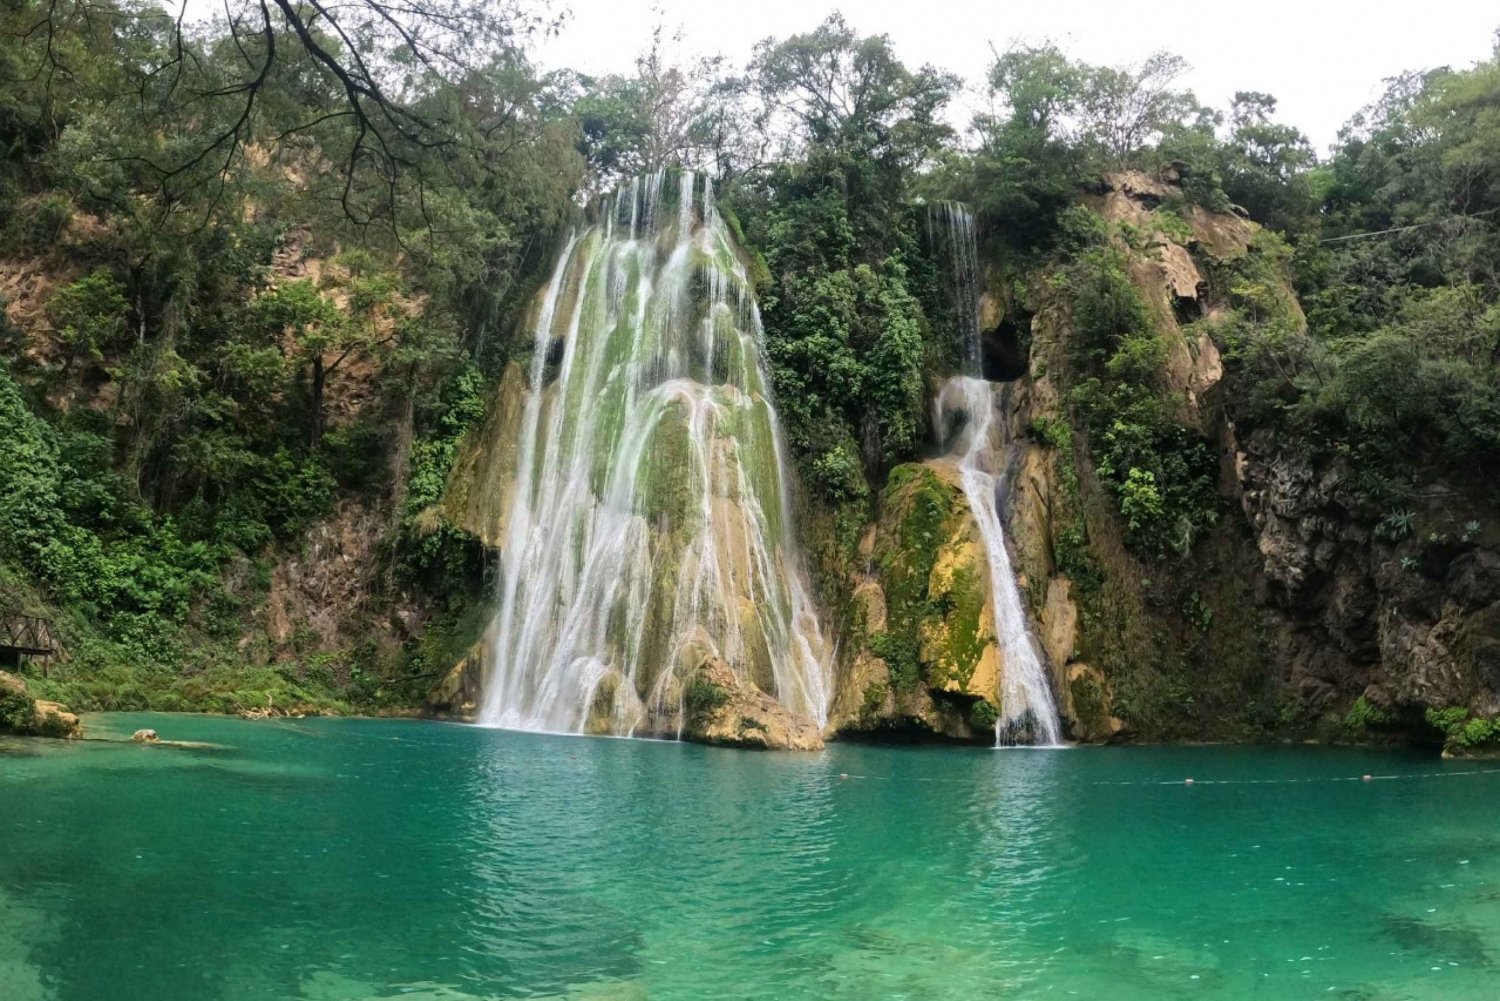 Two places, one adventure: Minas Viejas and Meco Waterfalls